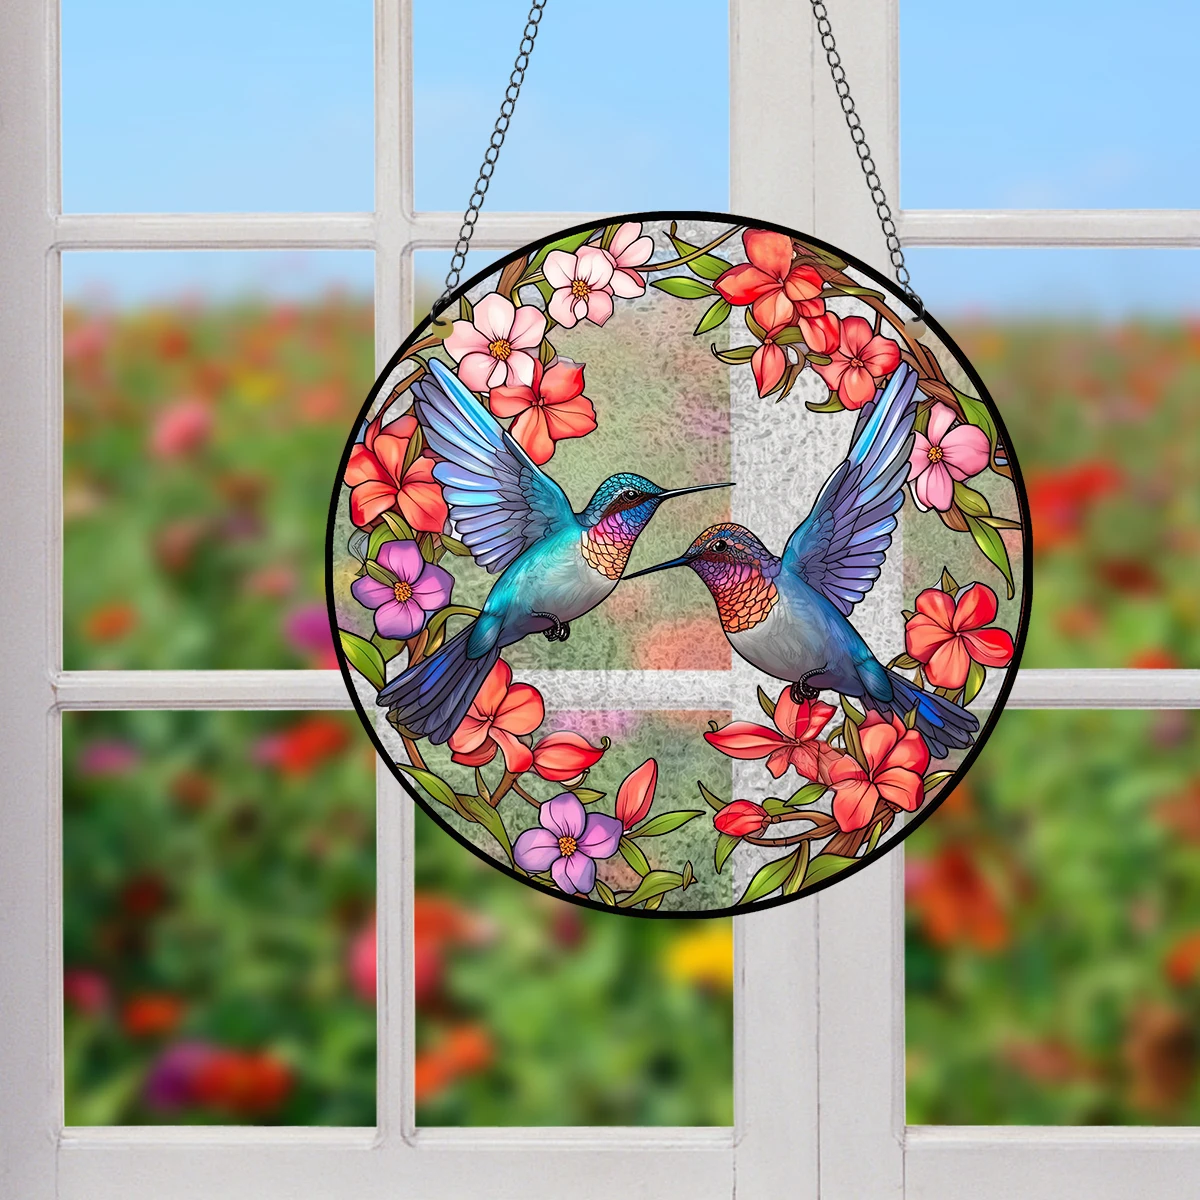 Glass Pattern Hummingbird with Flower Stained Suncatcher Bird Stained Window Hangings Hummingbird Gift for Home Decor